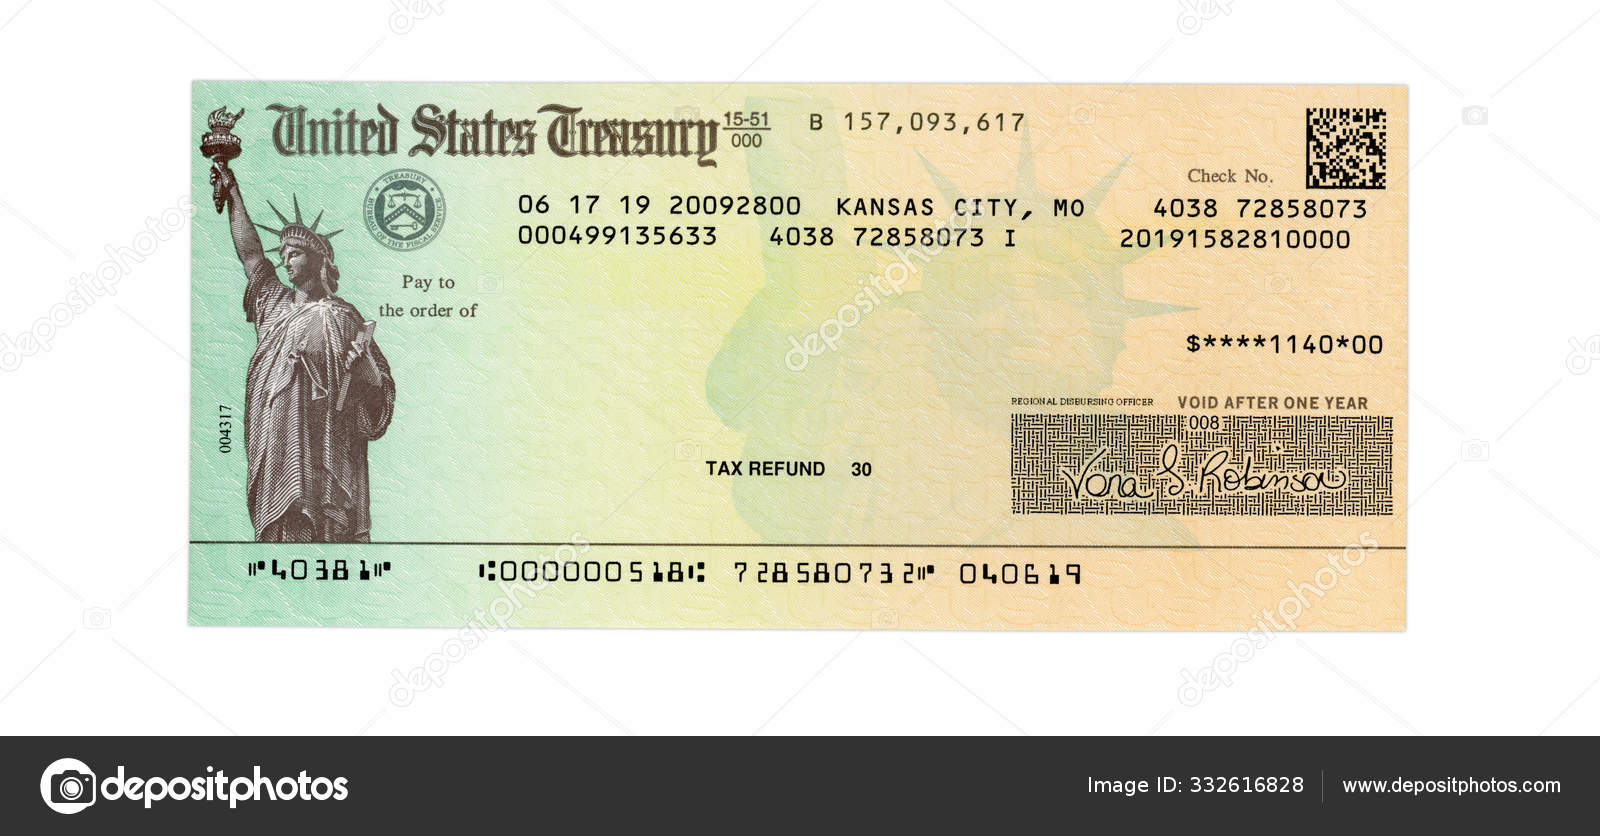 united-states-treasury-check-for-either-a-federal-tax-refund-or-stock